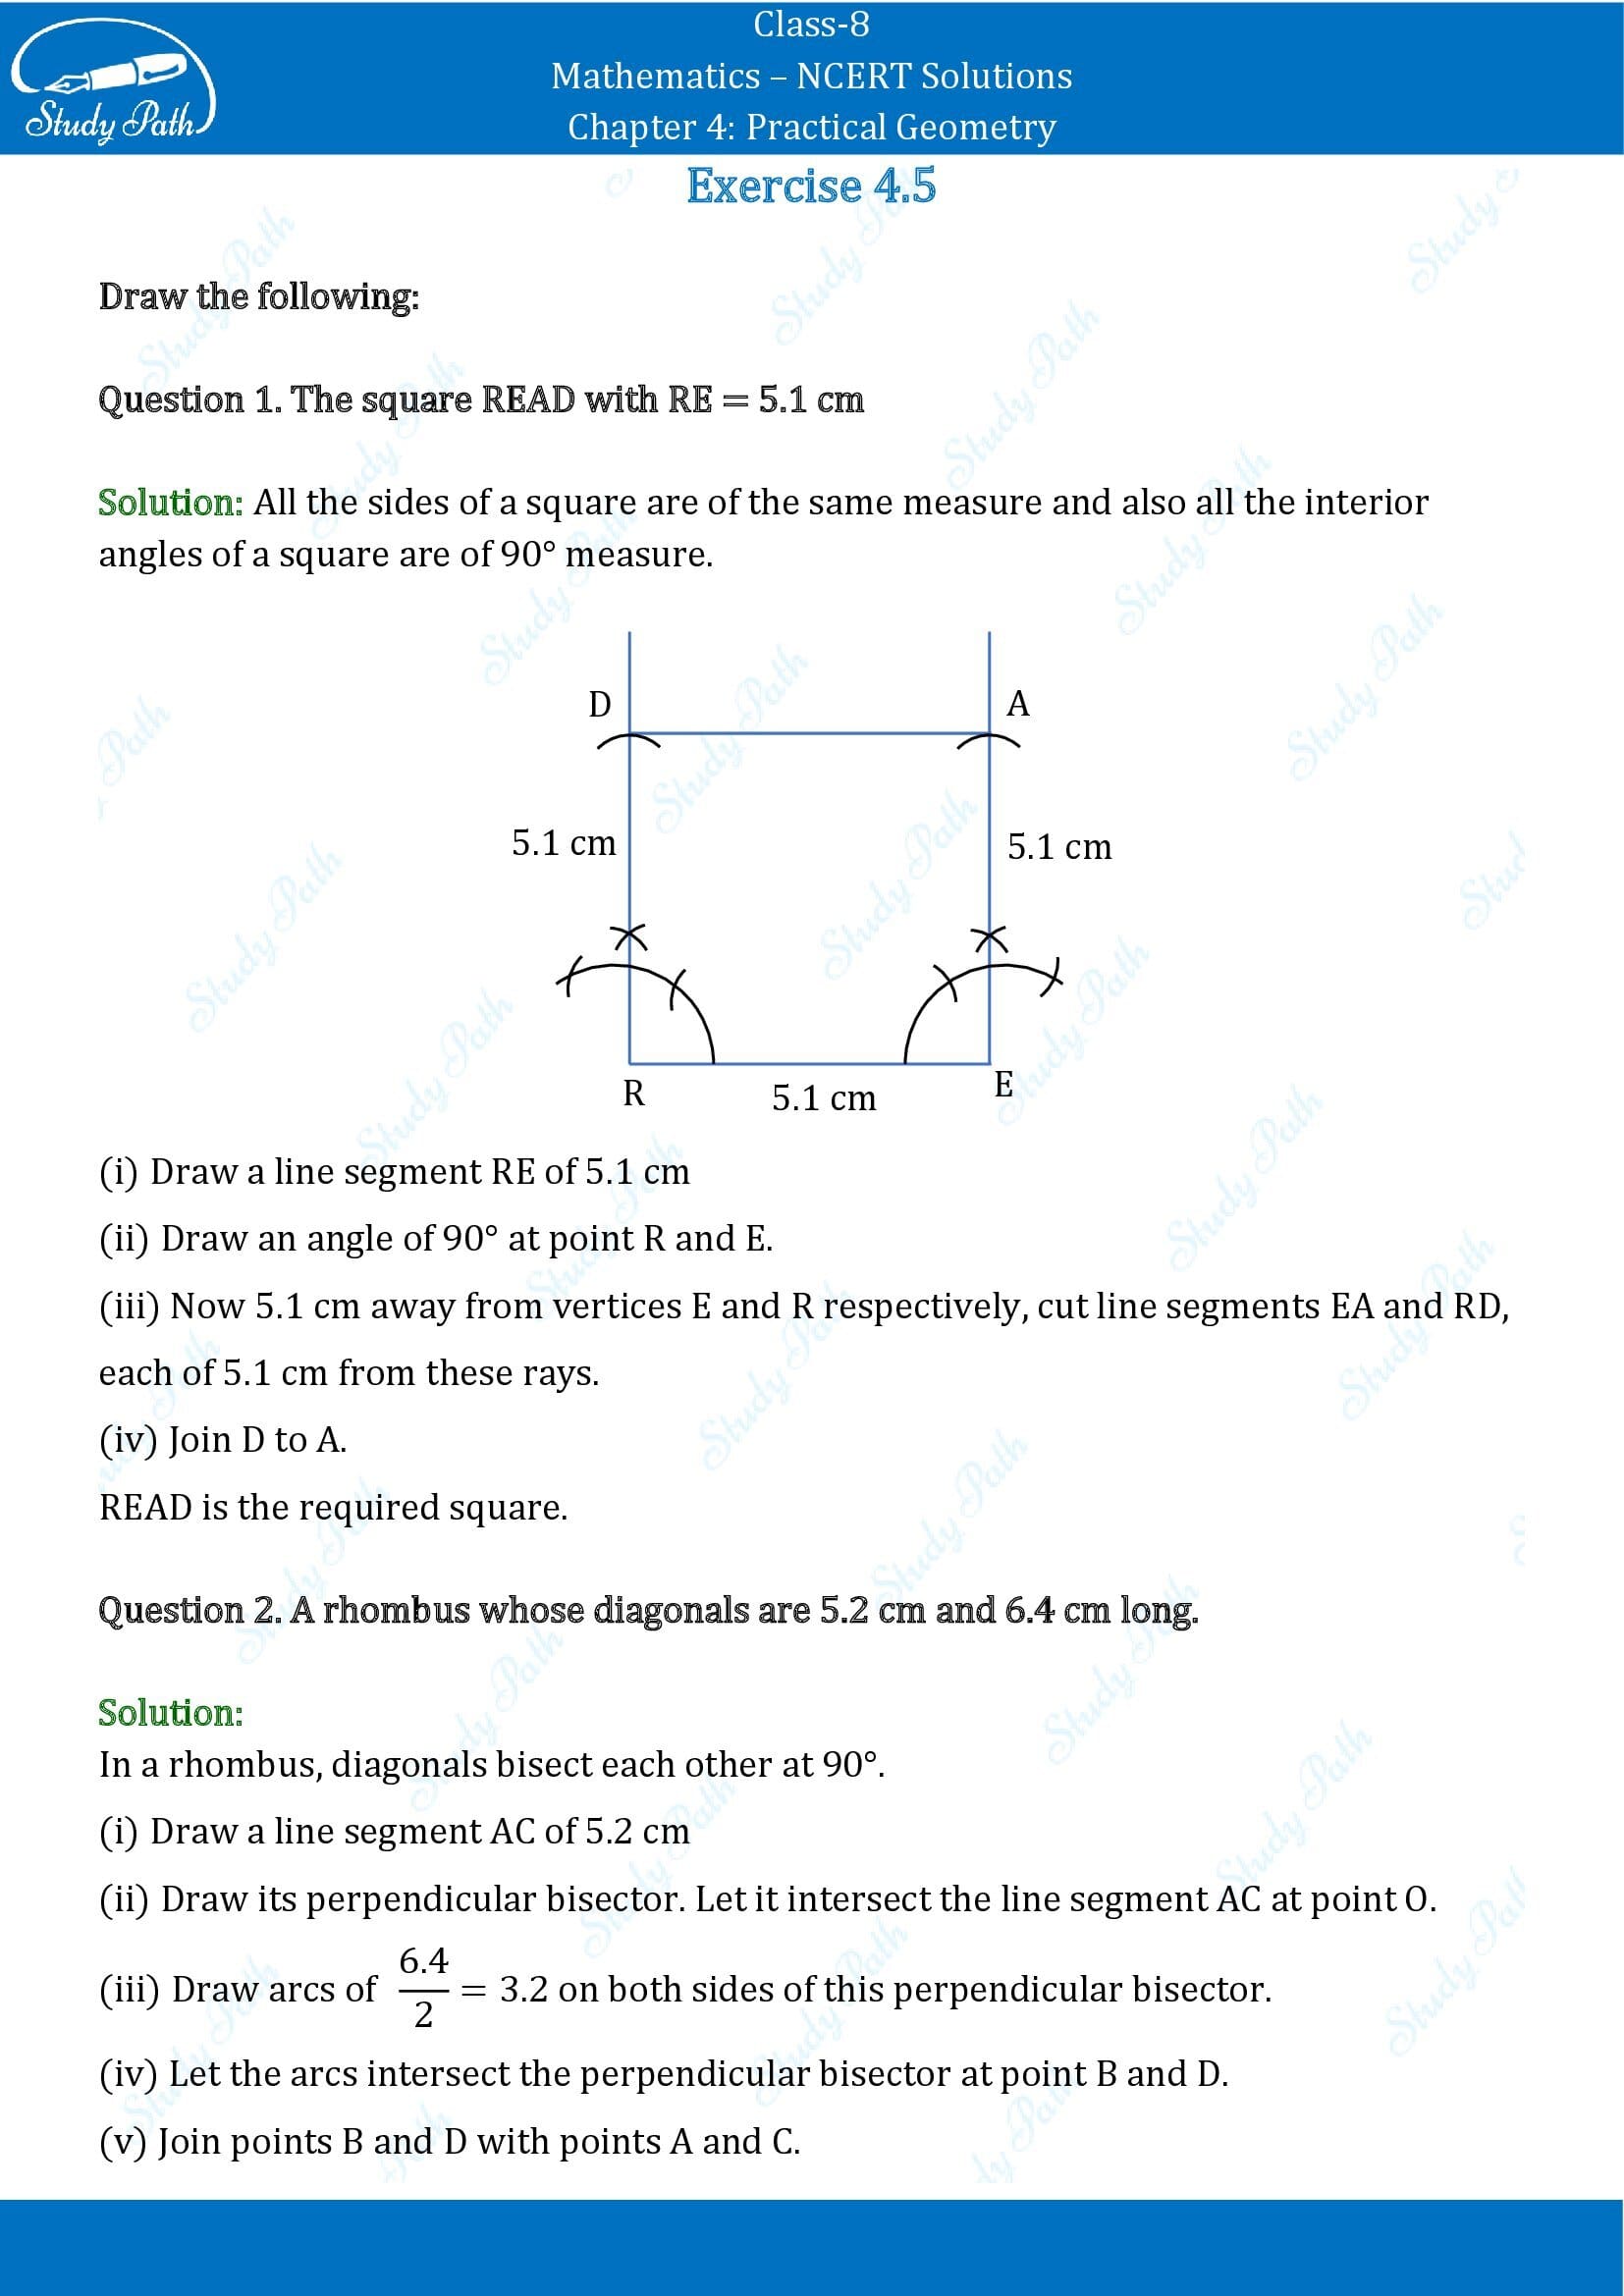 NCERT Solutions for Class 8 Maths Chapter 4 Practical Geometry Exercise 4.5 00001